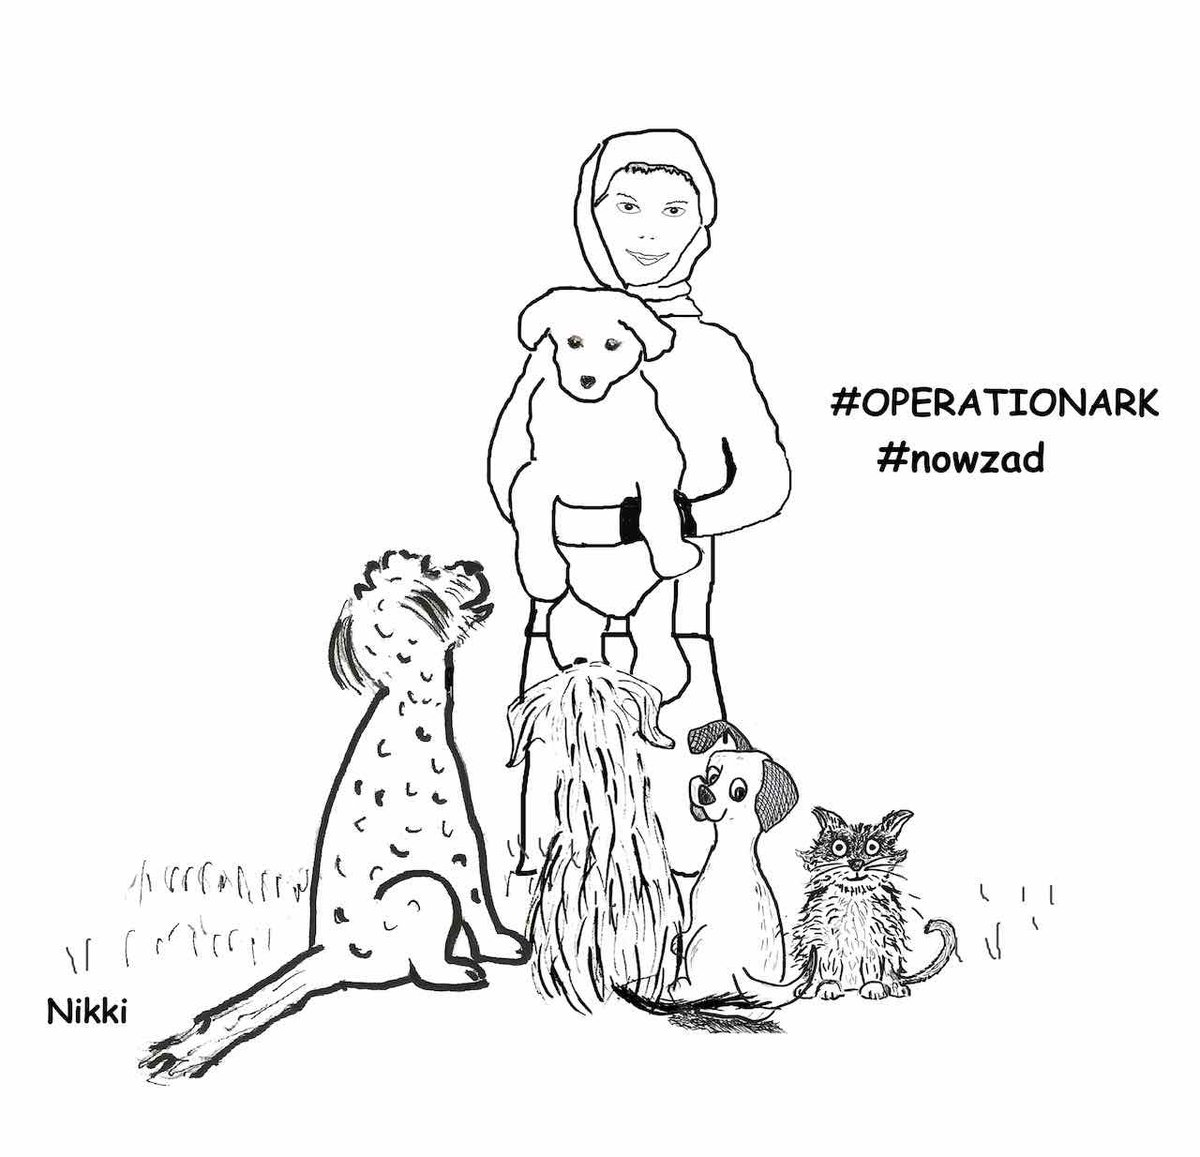 #TruthMatters Many support you @PenFarthing and we know the truth #operationark #nowzad Read statement on the Nowzad website nowzad.com/news/article/s…